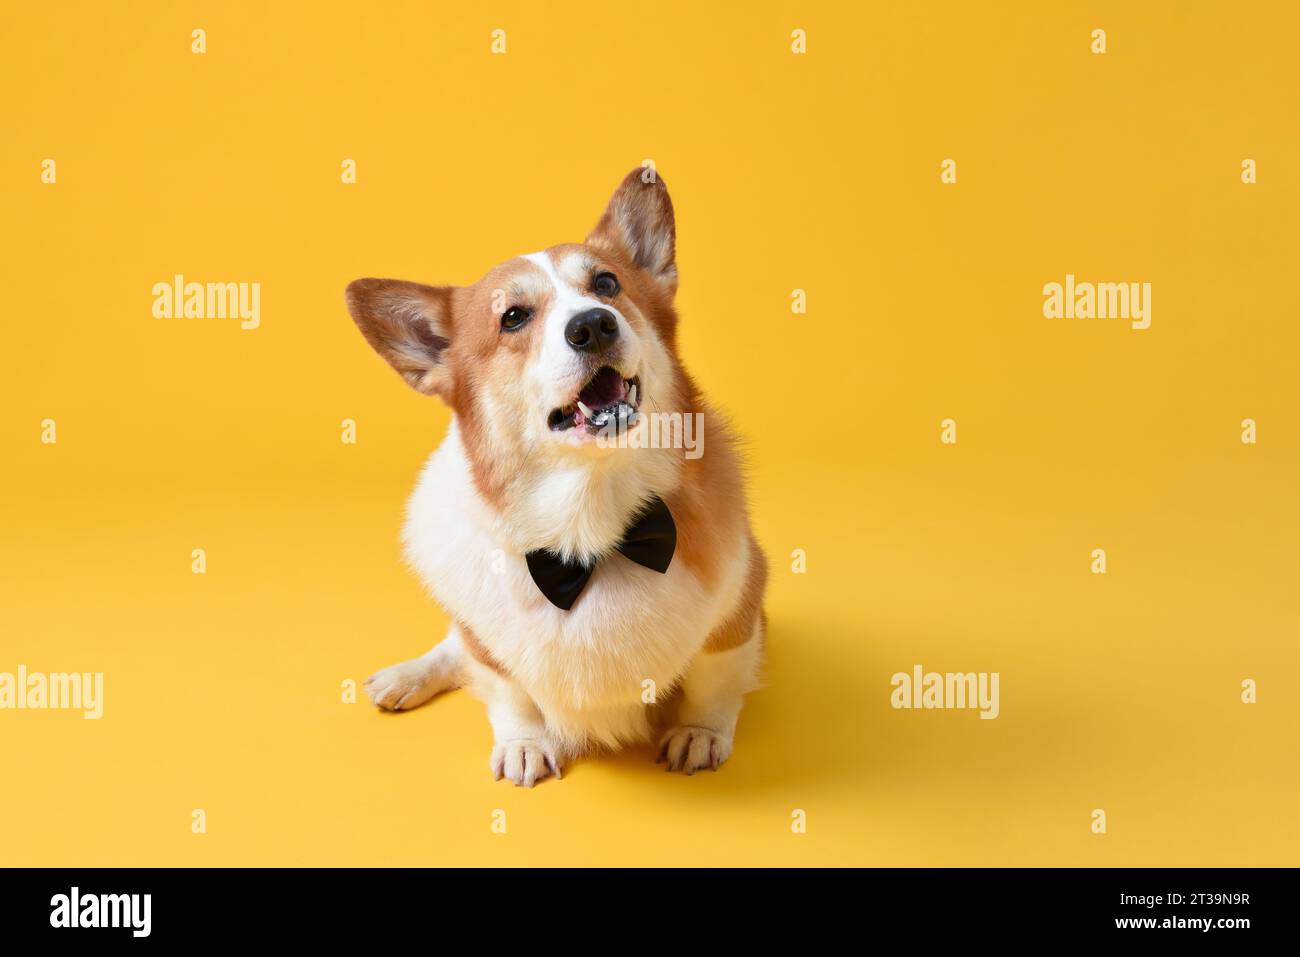 Cute Pembroke Welsh Corgi dog sitting and looking up in yellow studio isolated background Stock Photo